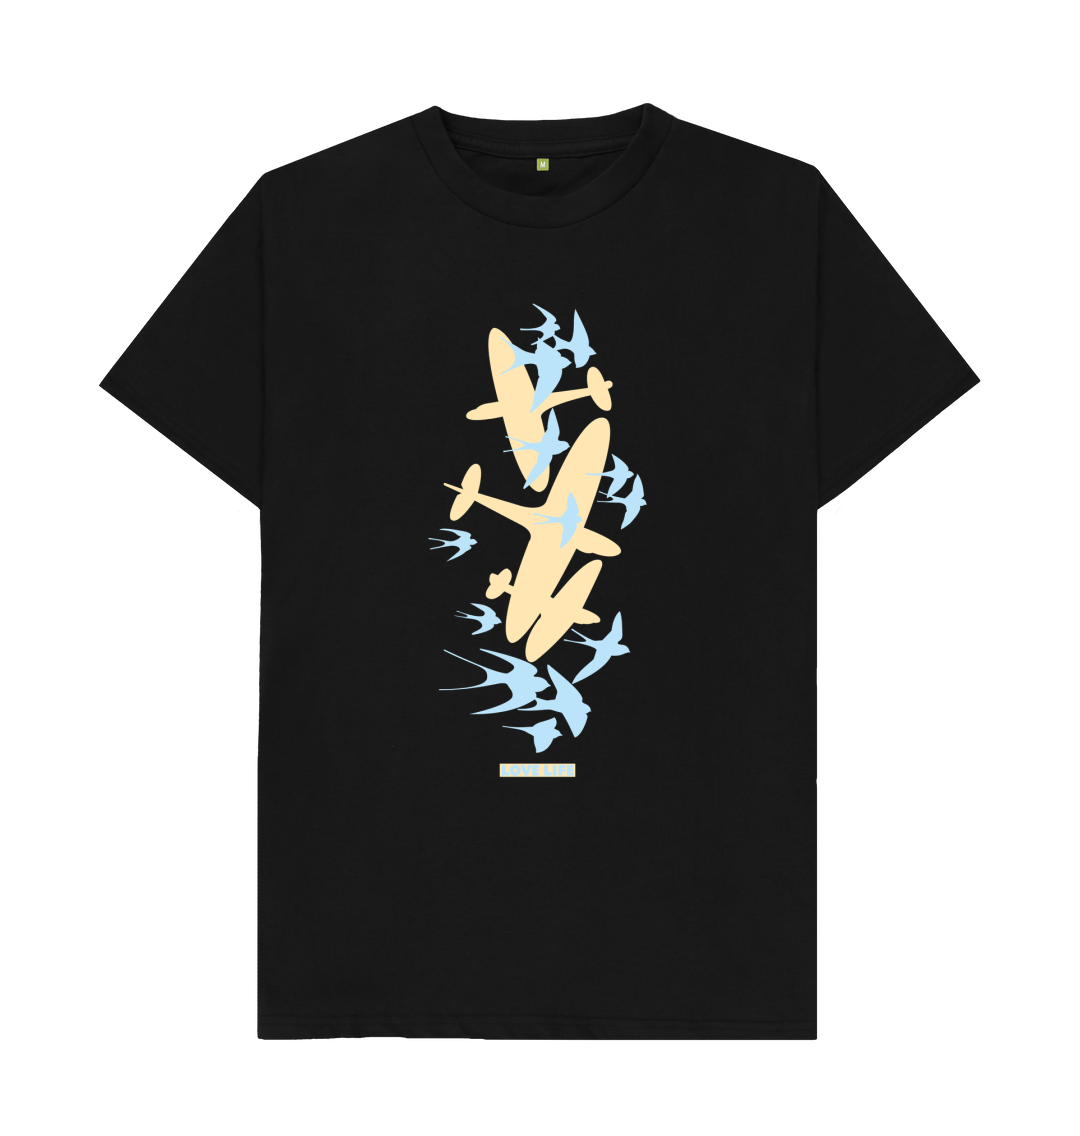 Blue Swallows and Spitfires T-Shirt